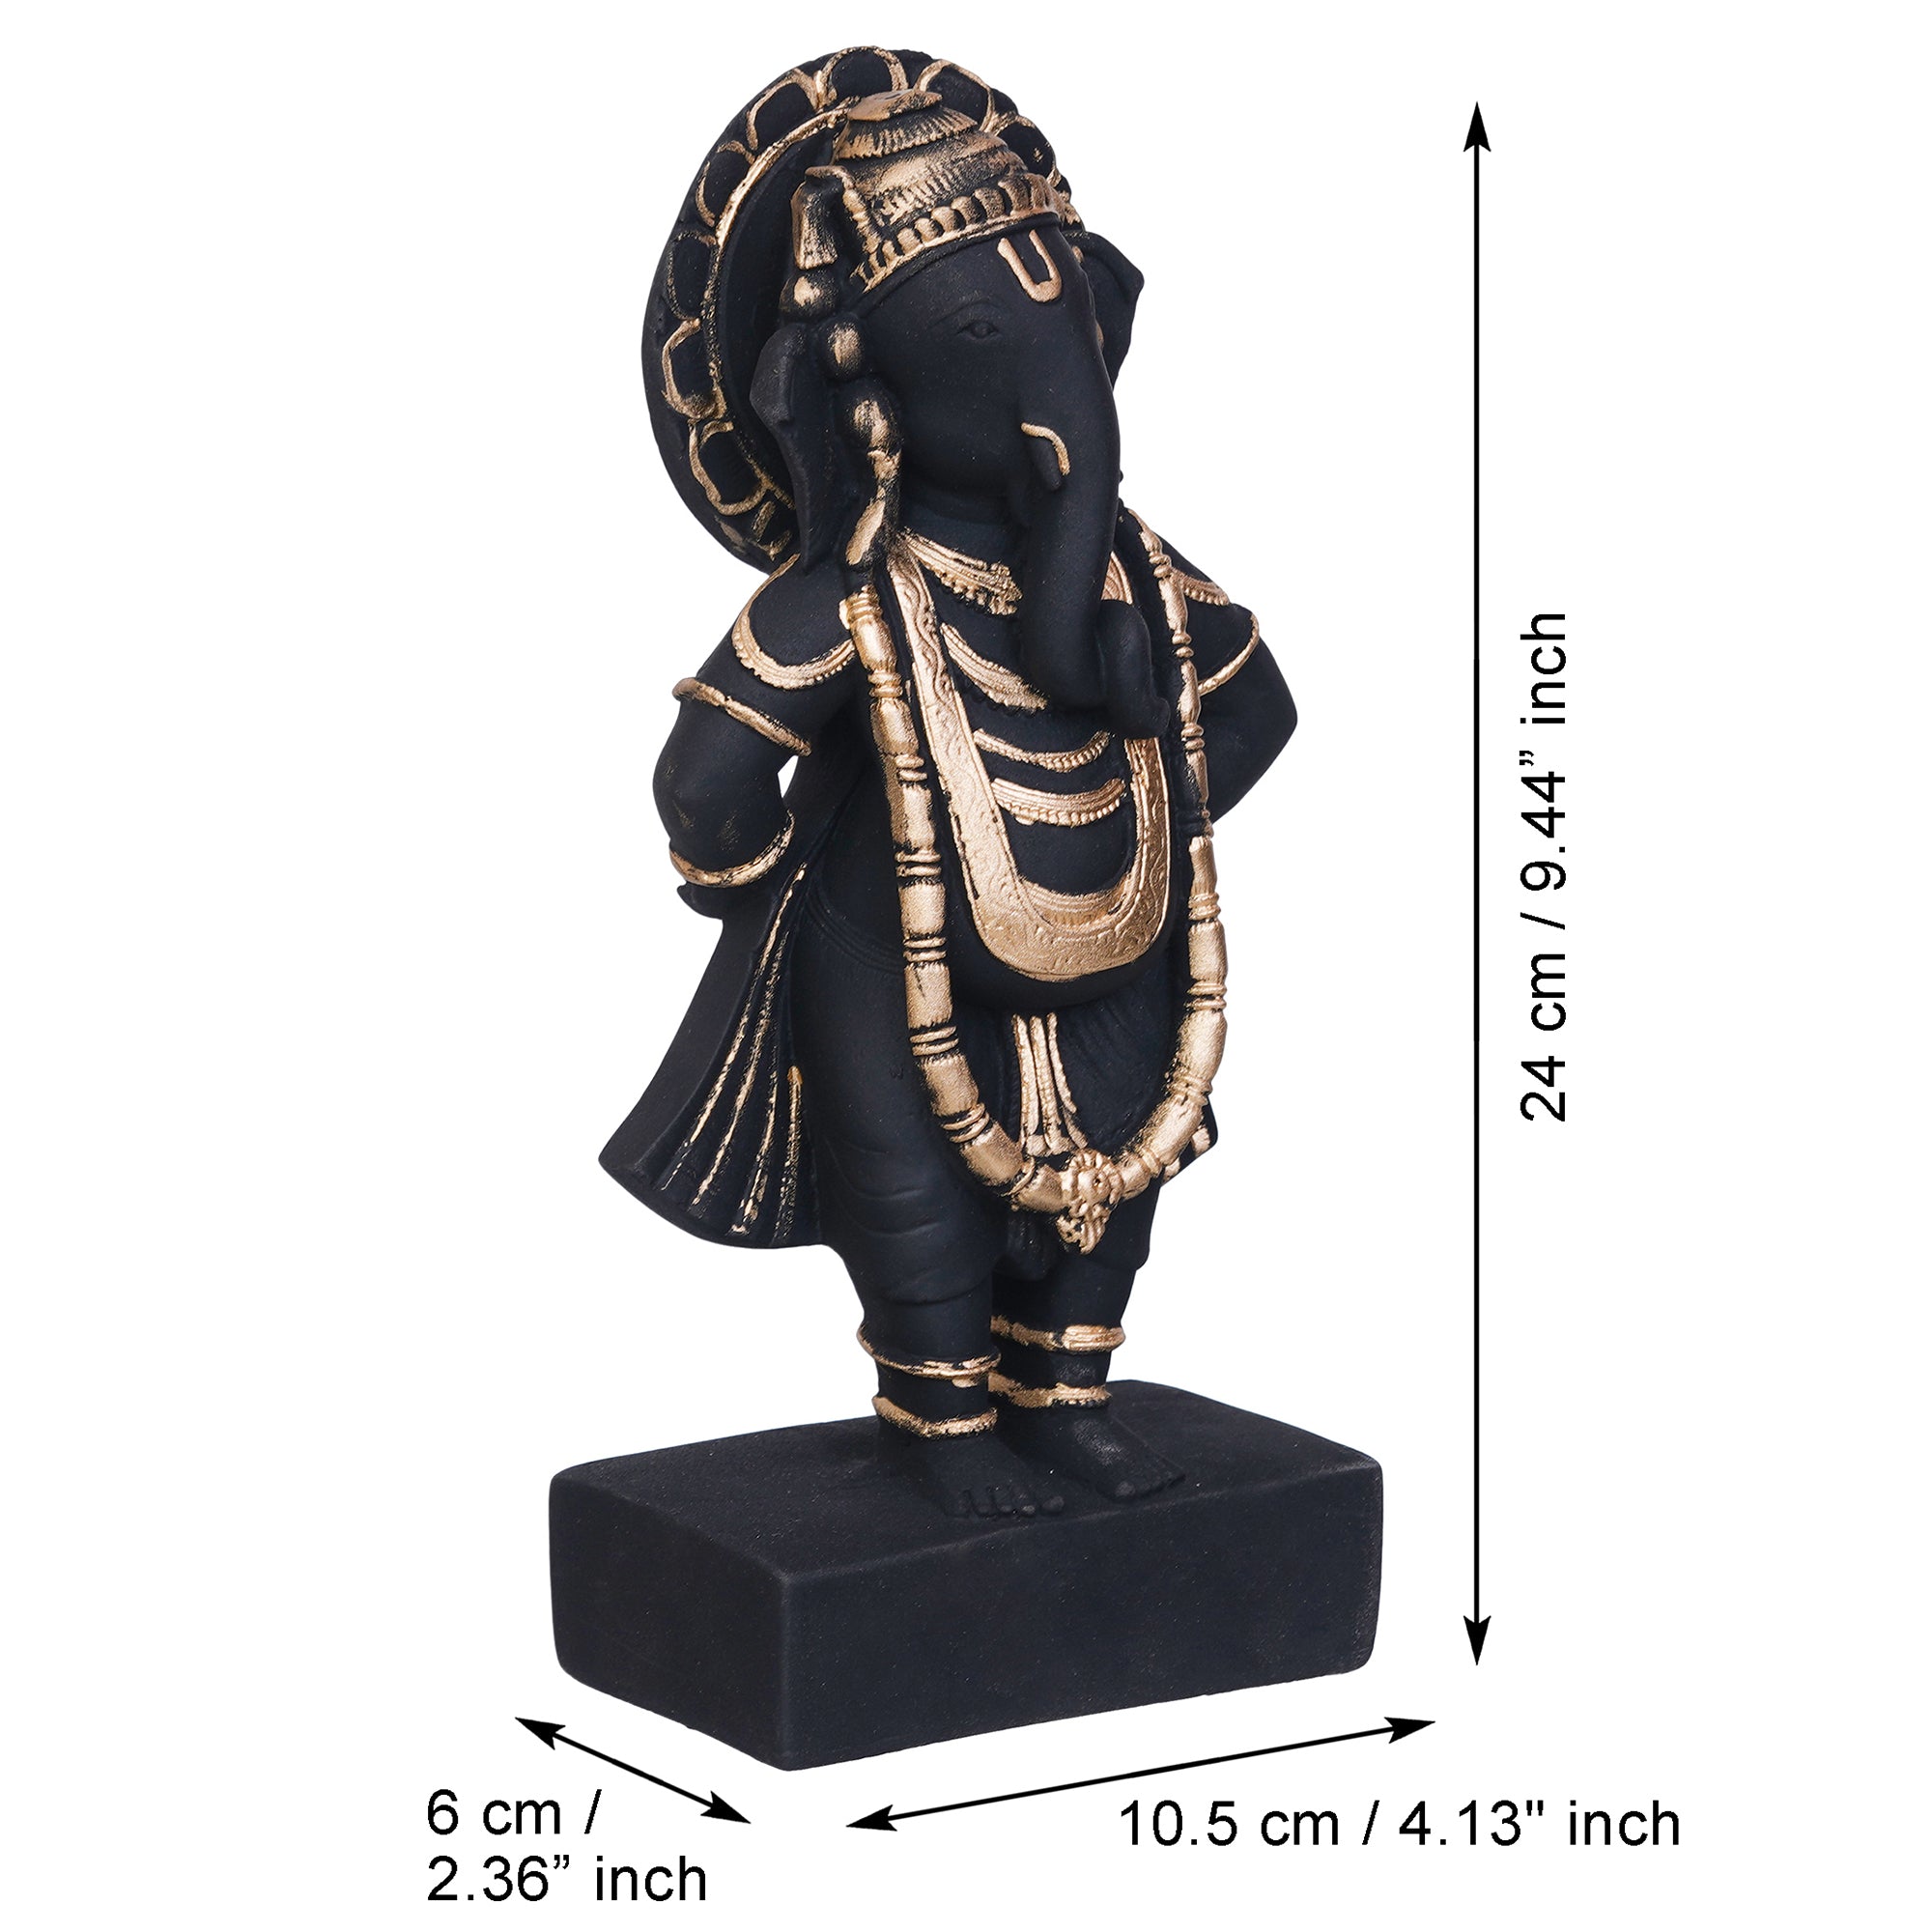 Black & Golden Polyresin Handcrafted Standing Lord Ganesha Statue 3